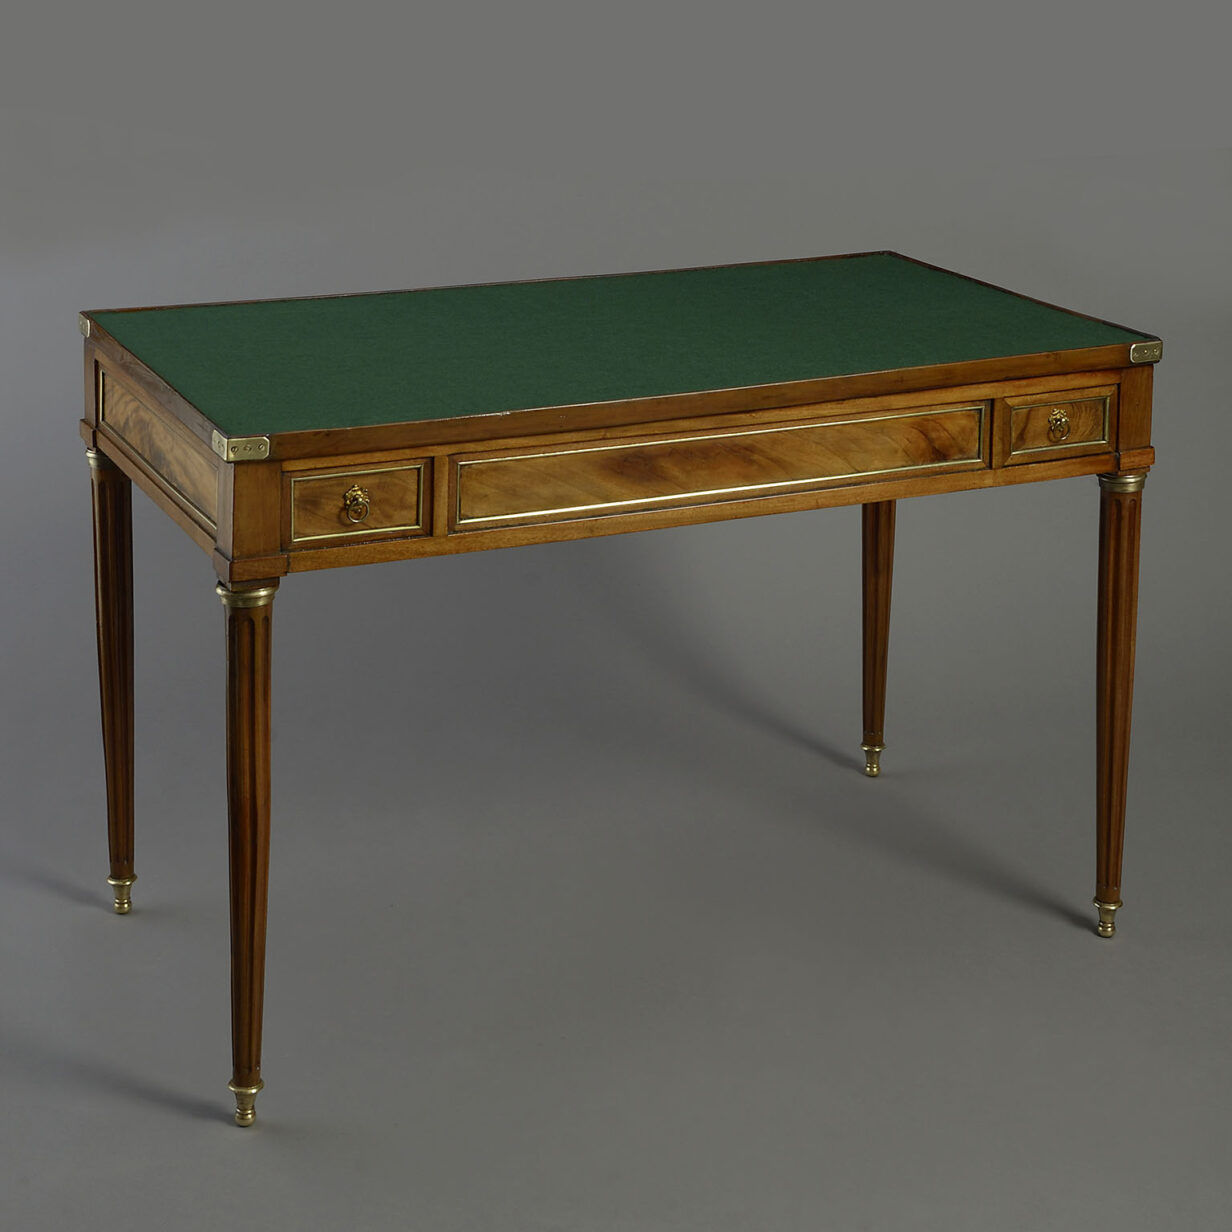 Late 18th century tric trac games table stamped e. Avril